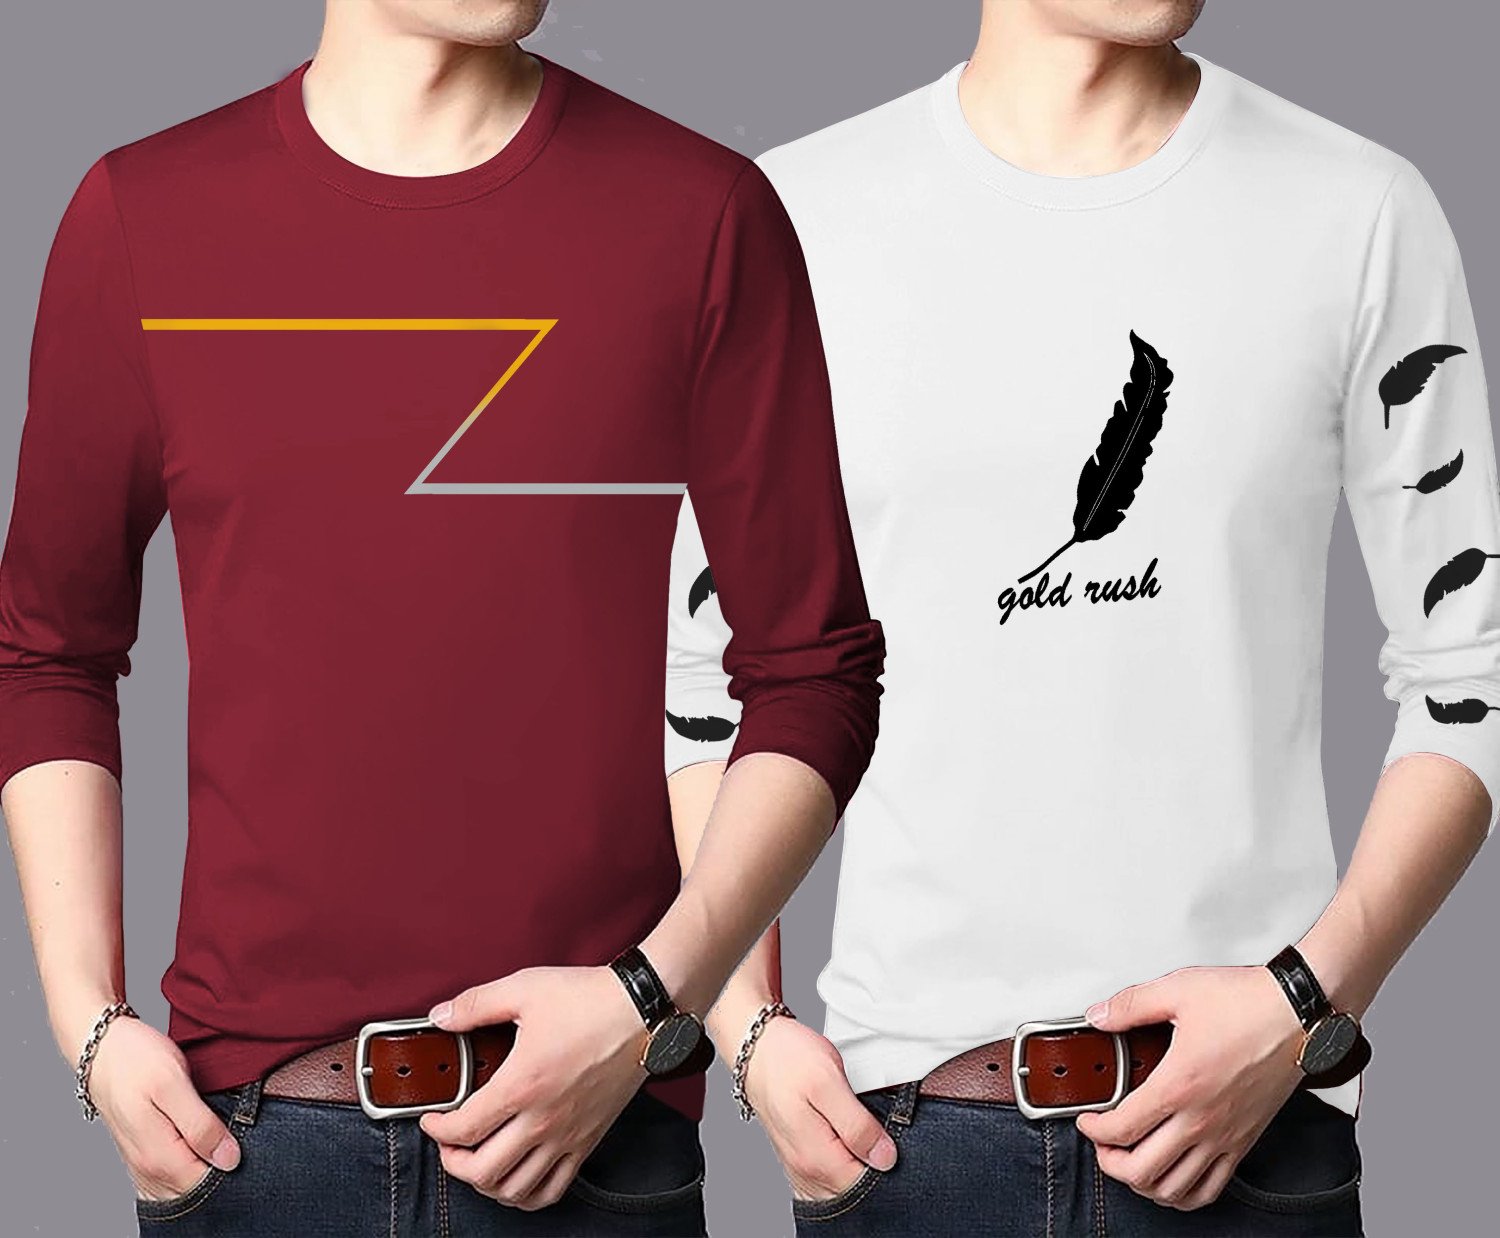 LG Garments Trendy Round Neck Full Sleeves Cotton Rich Blend Multi-colour T-Shirts For Men - (Combo Pack Of 2) | Men's T-Shirt (2 in 1) (S, M, L, XL, XXL)